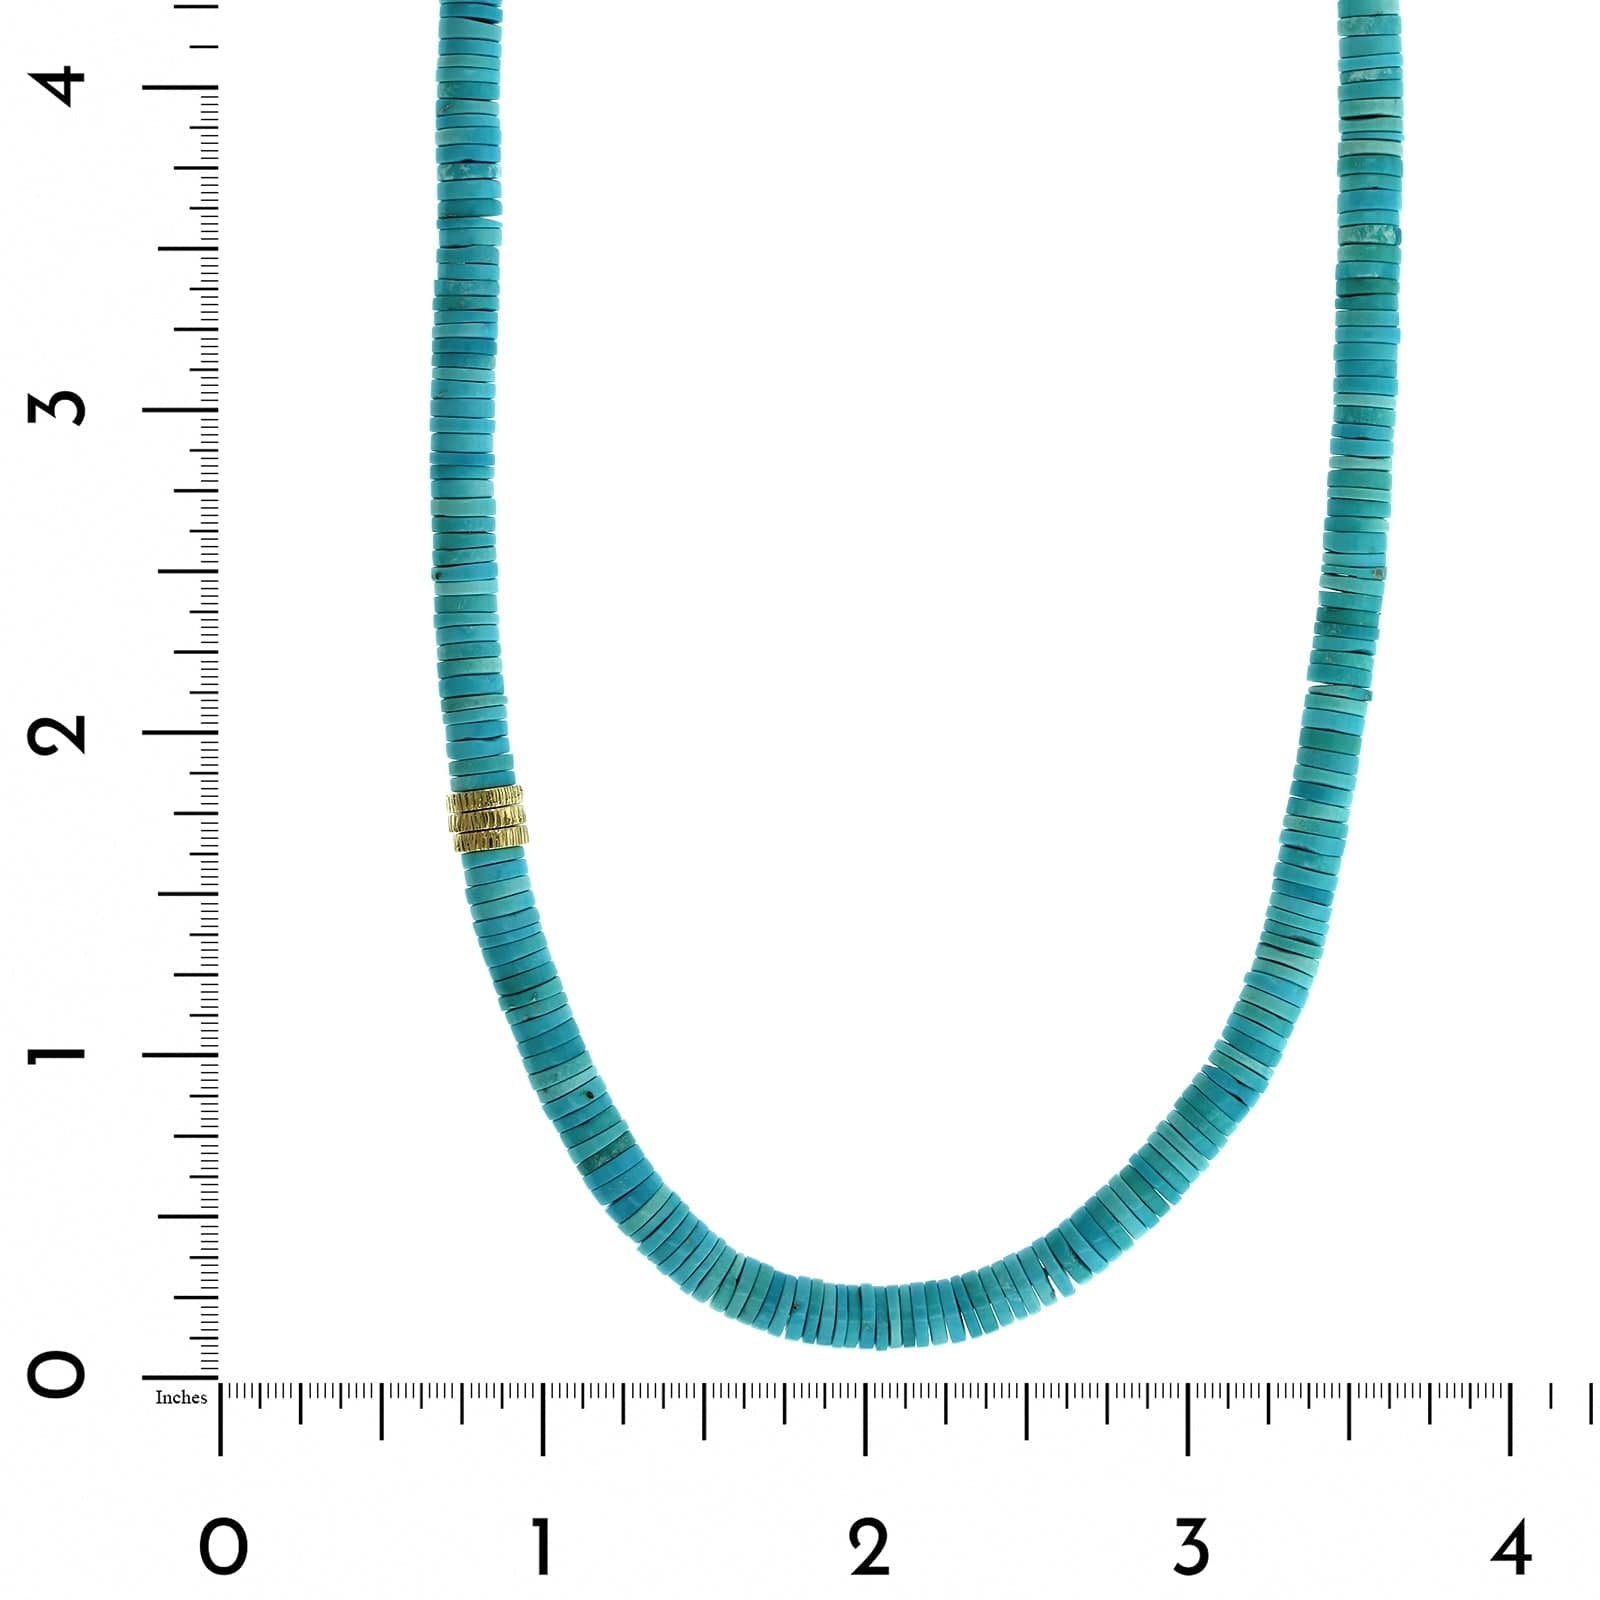 18K Yellow Gold Turquoise Bead Necklace